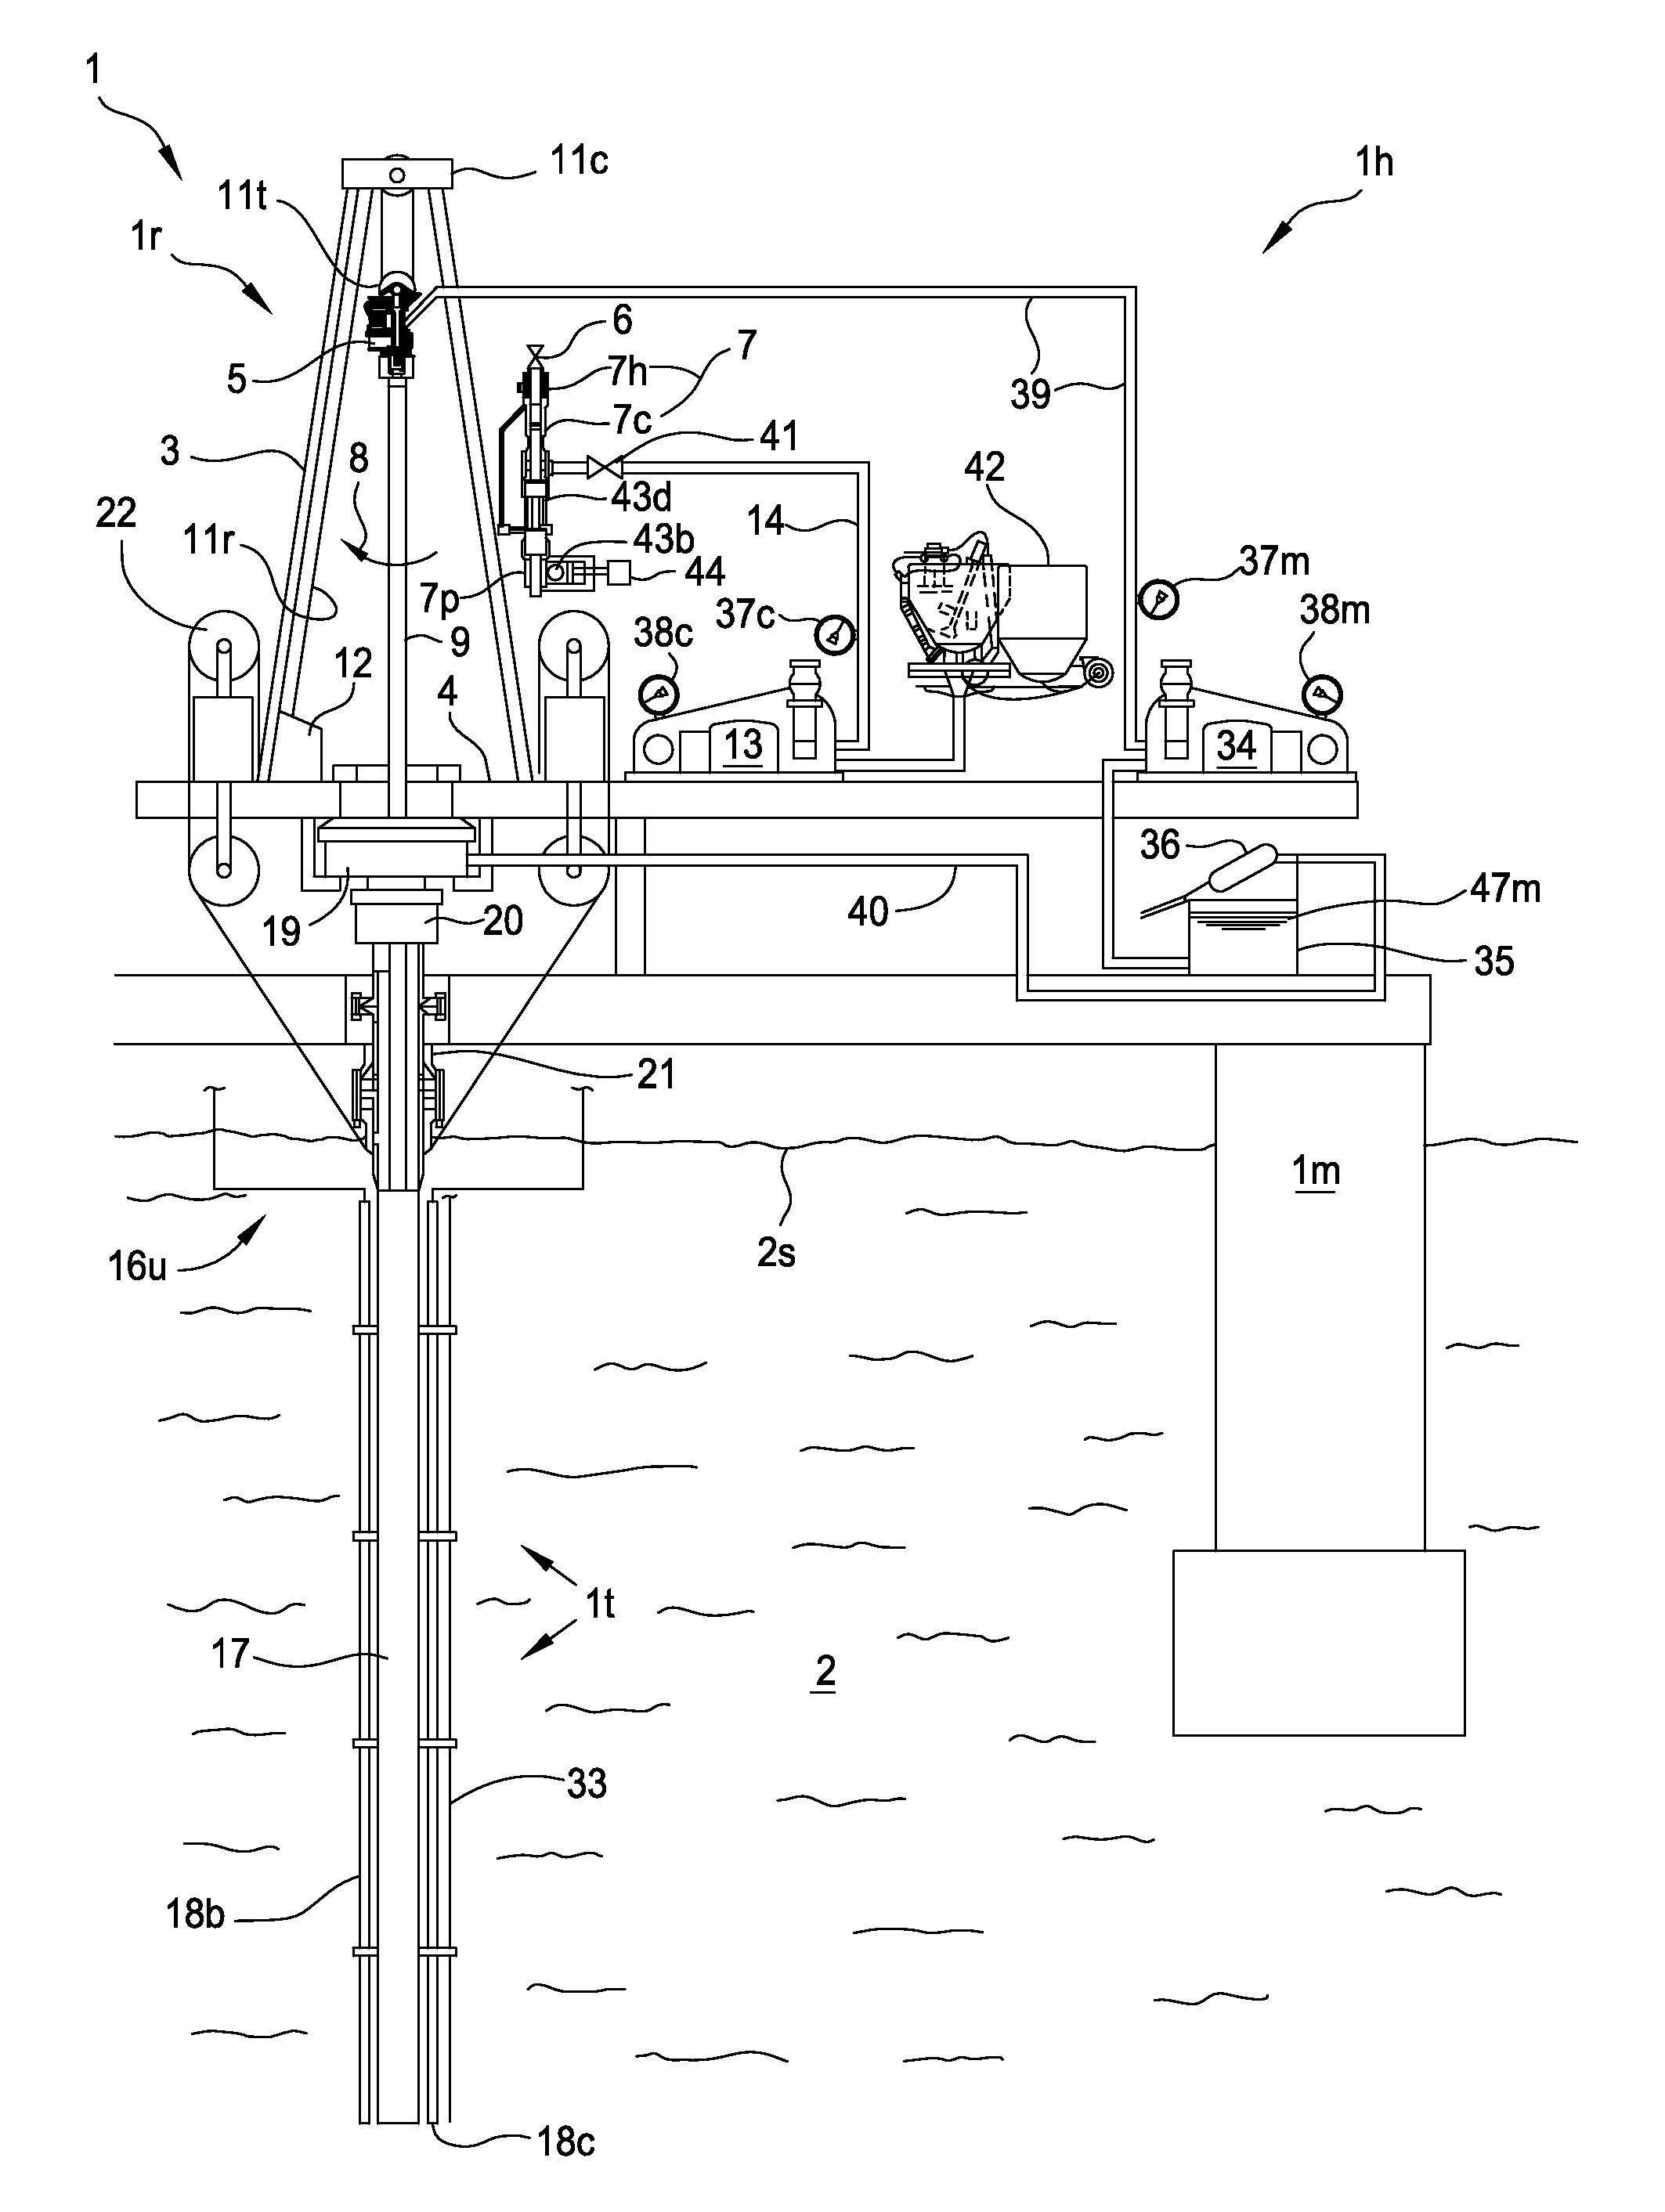 Telemetry operated ball release system